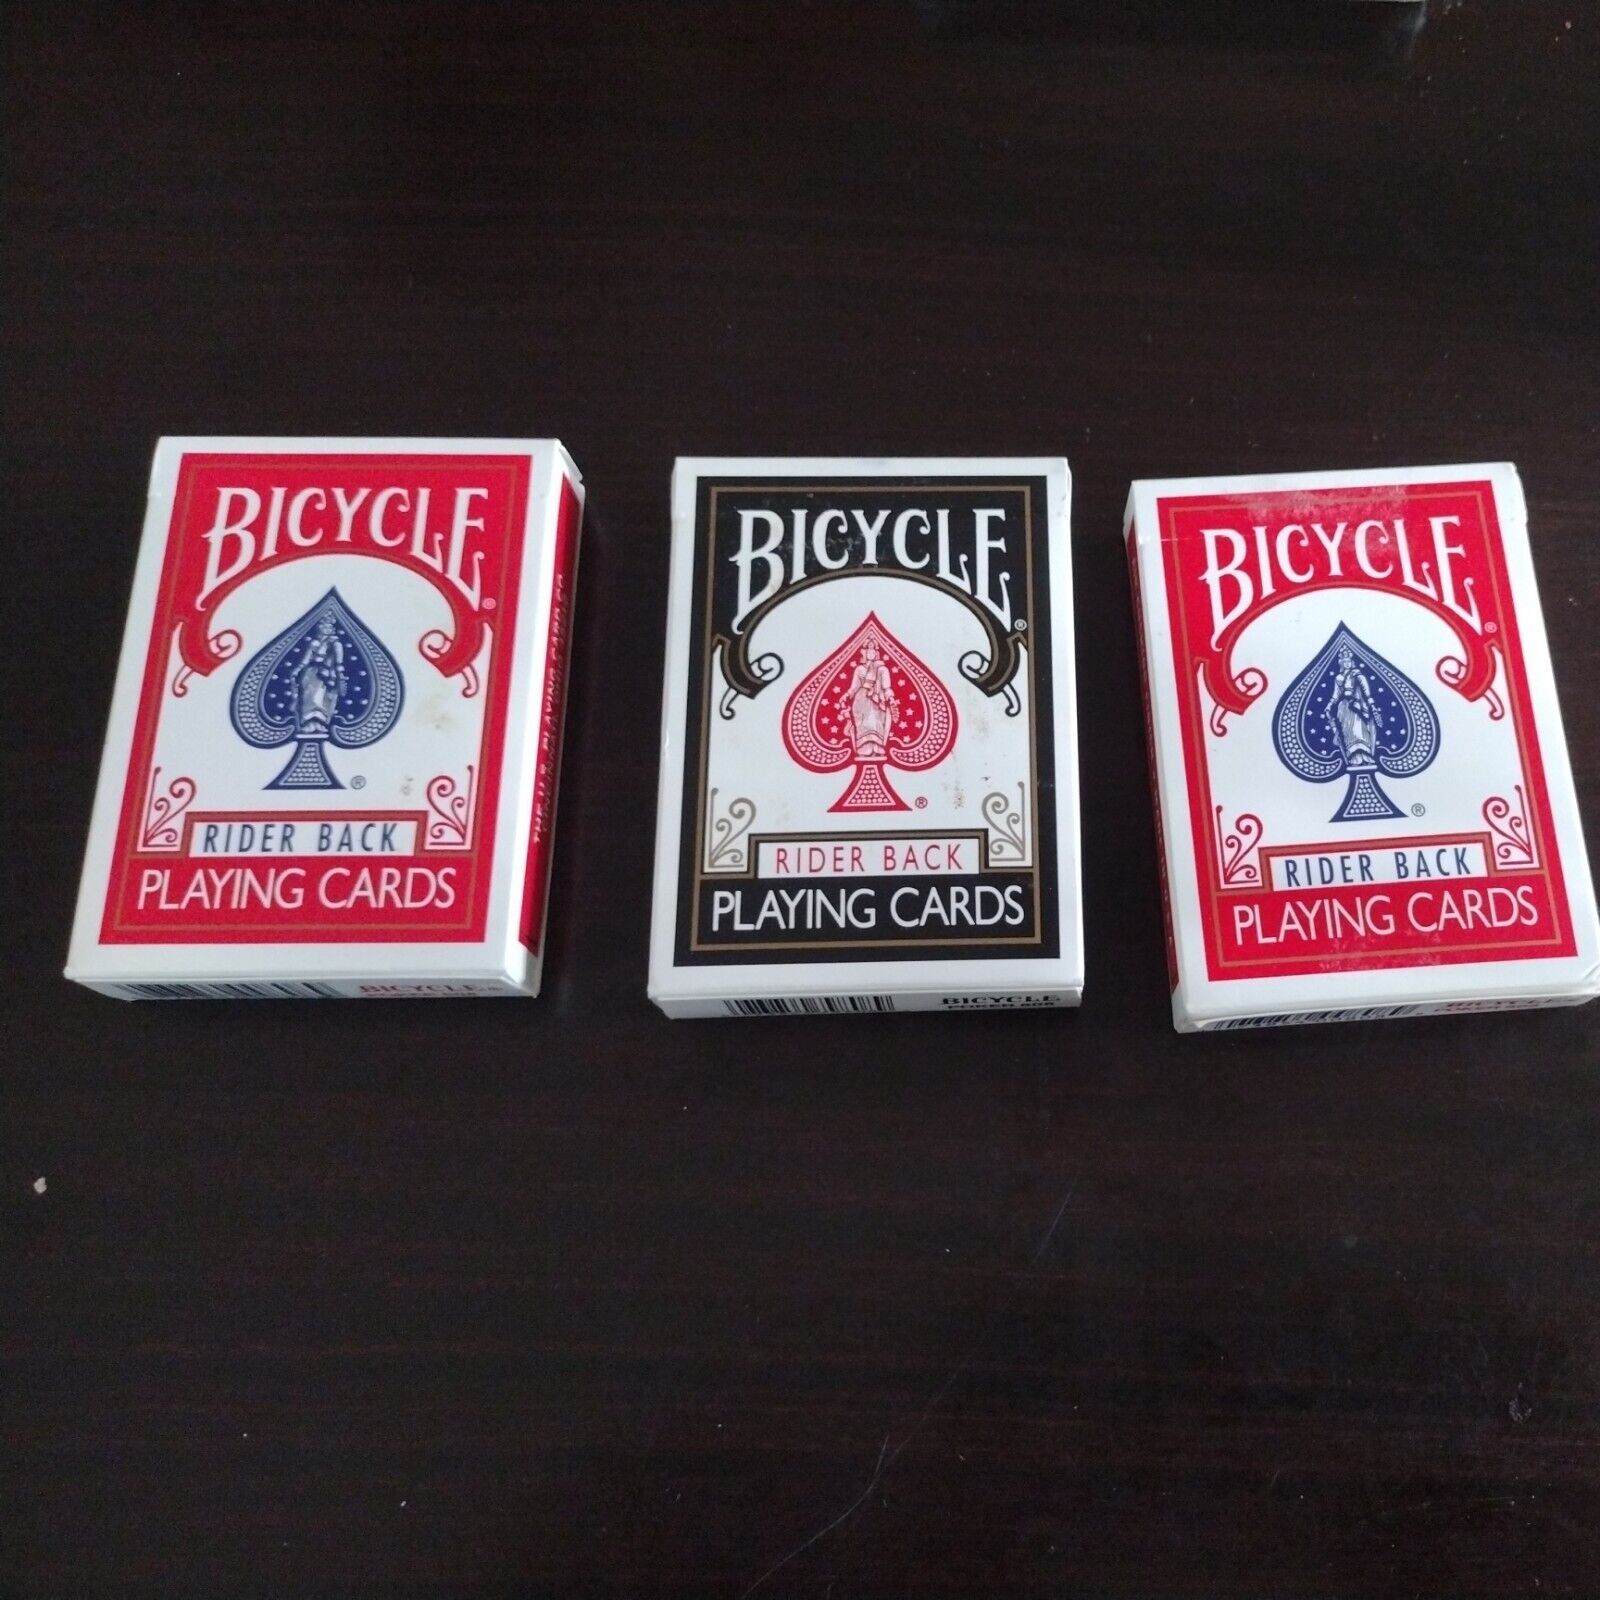 Bicycle Standard Poker Playing Cards 3 pk ( 2 red 1 blue)